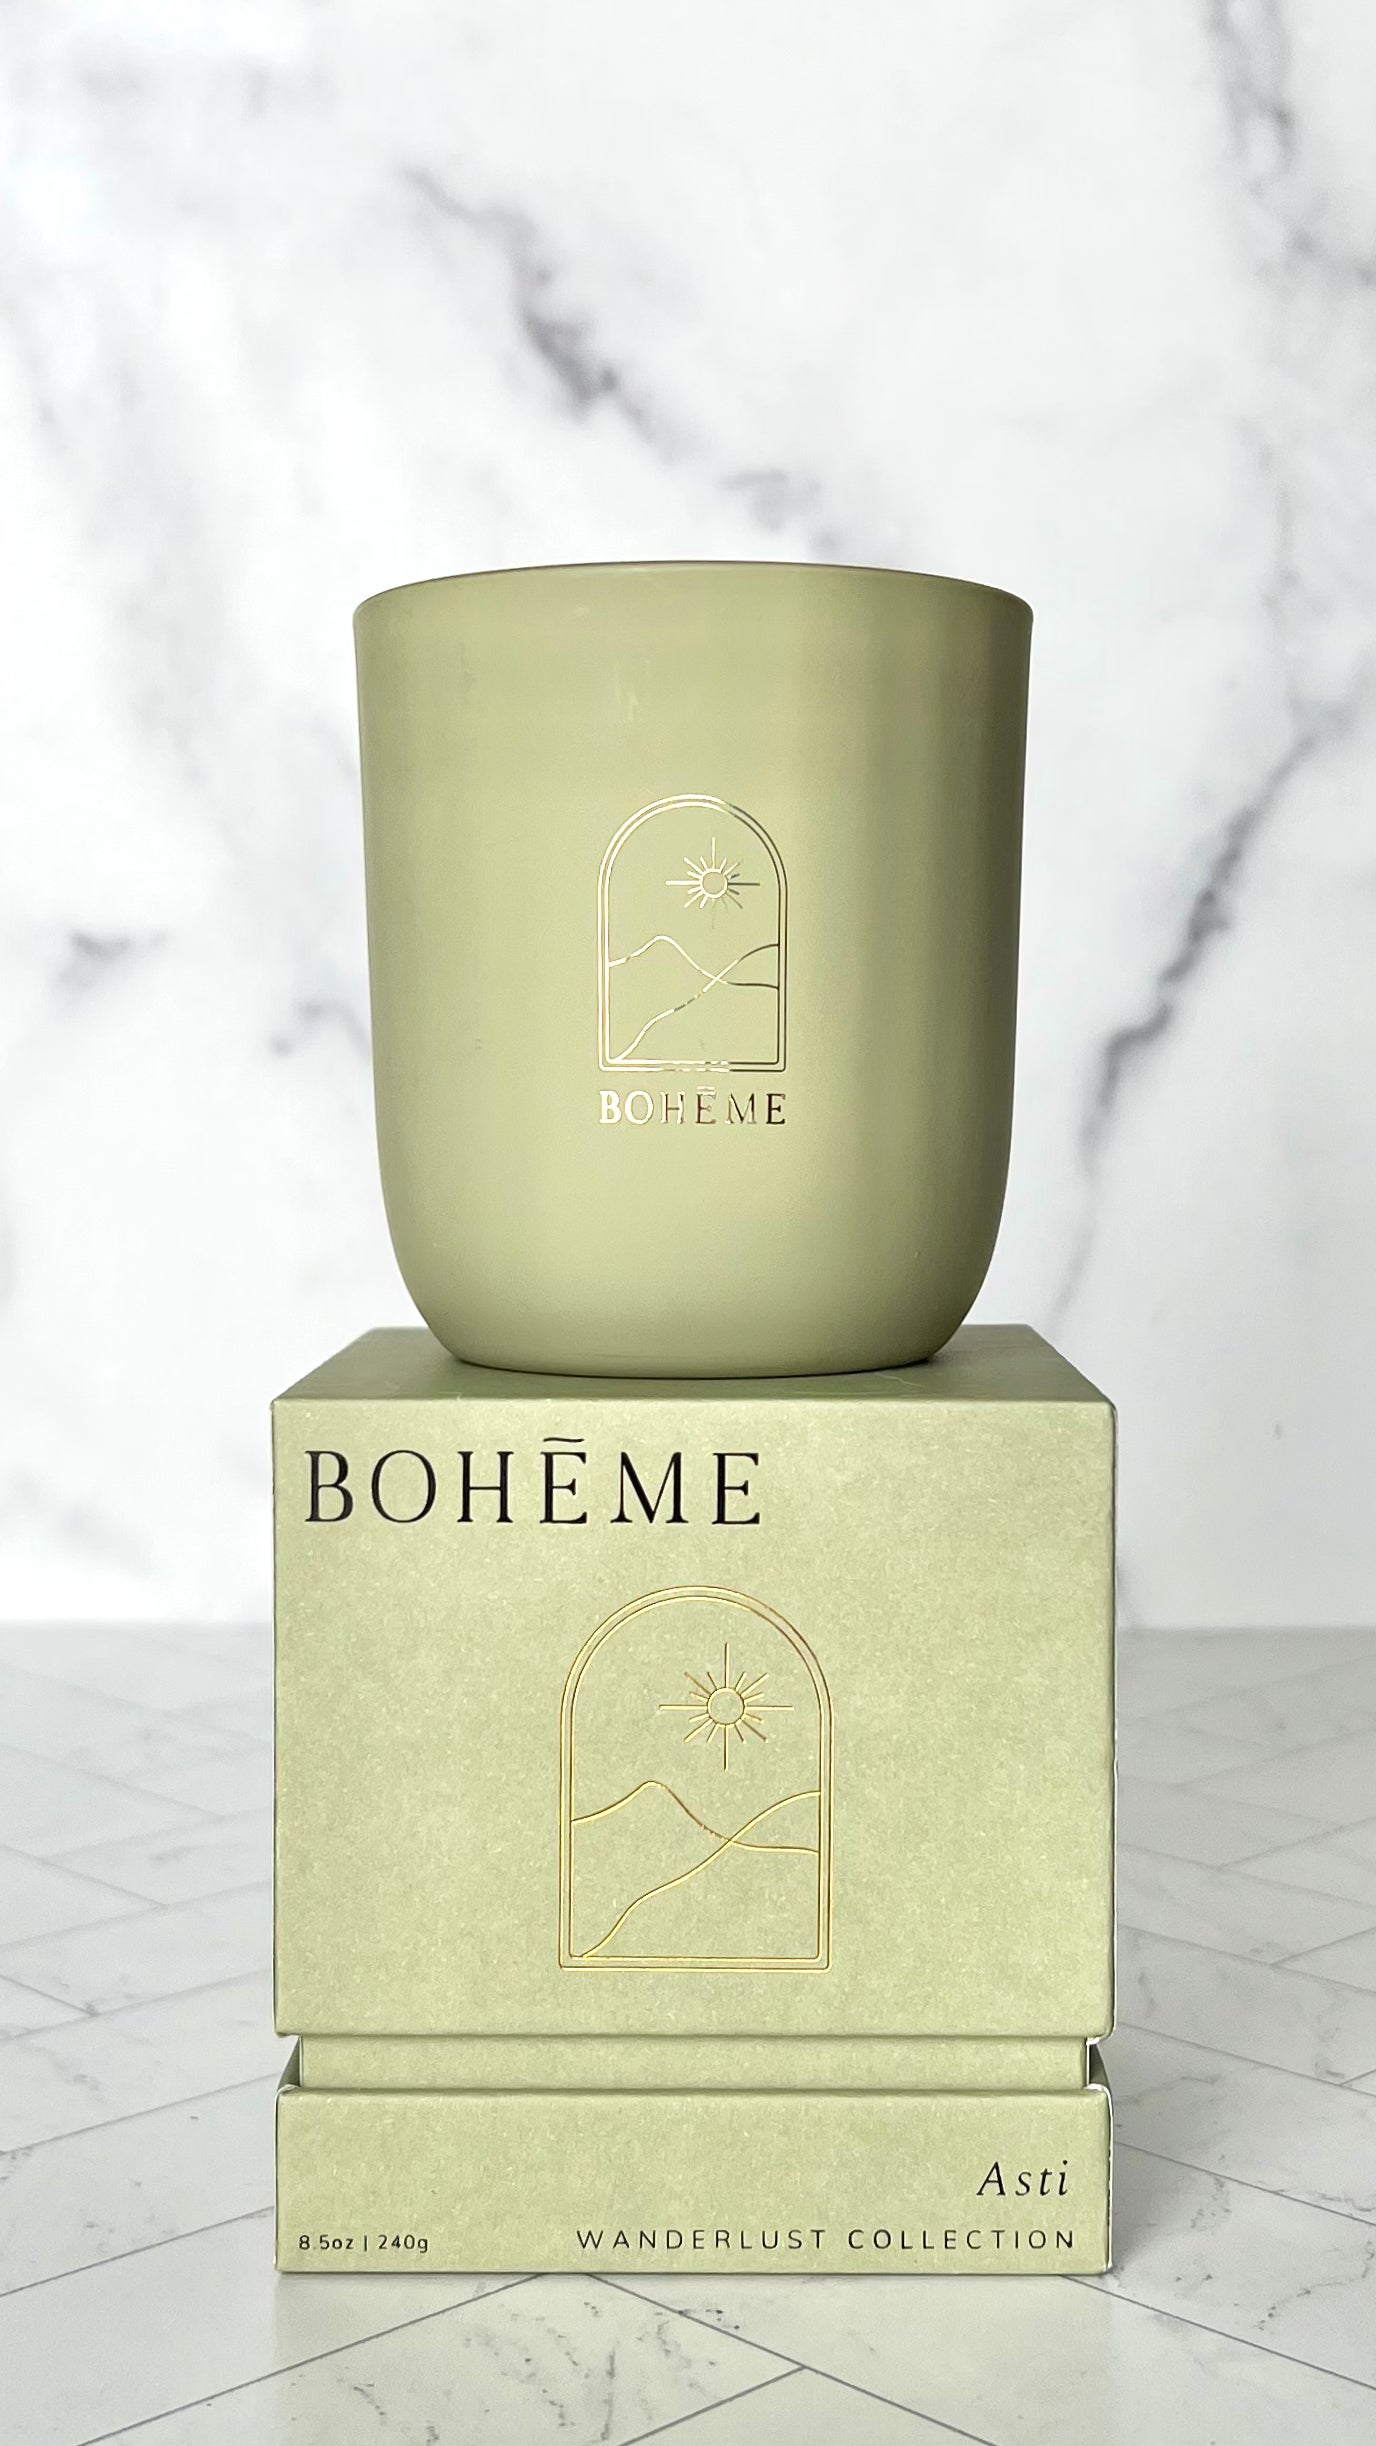 The Scented Candle in Asti stacked on top of its box showing is brand, Boheme